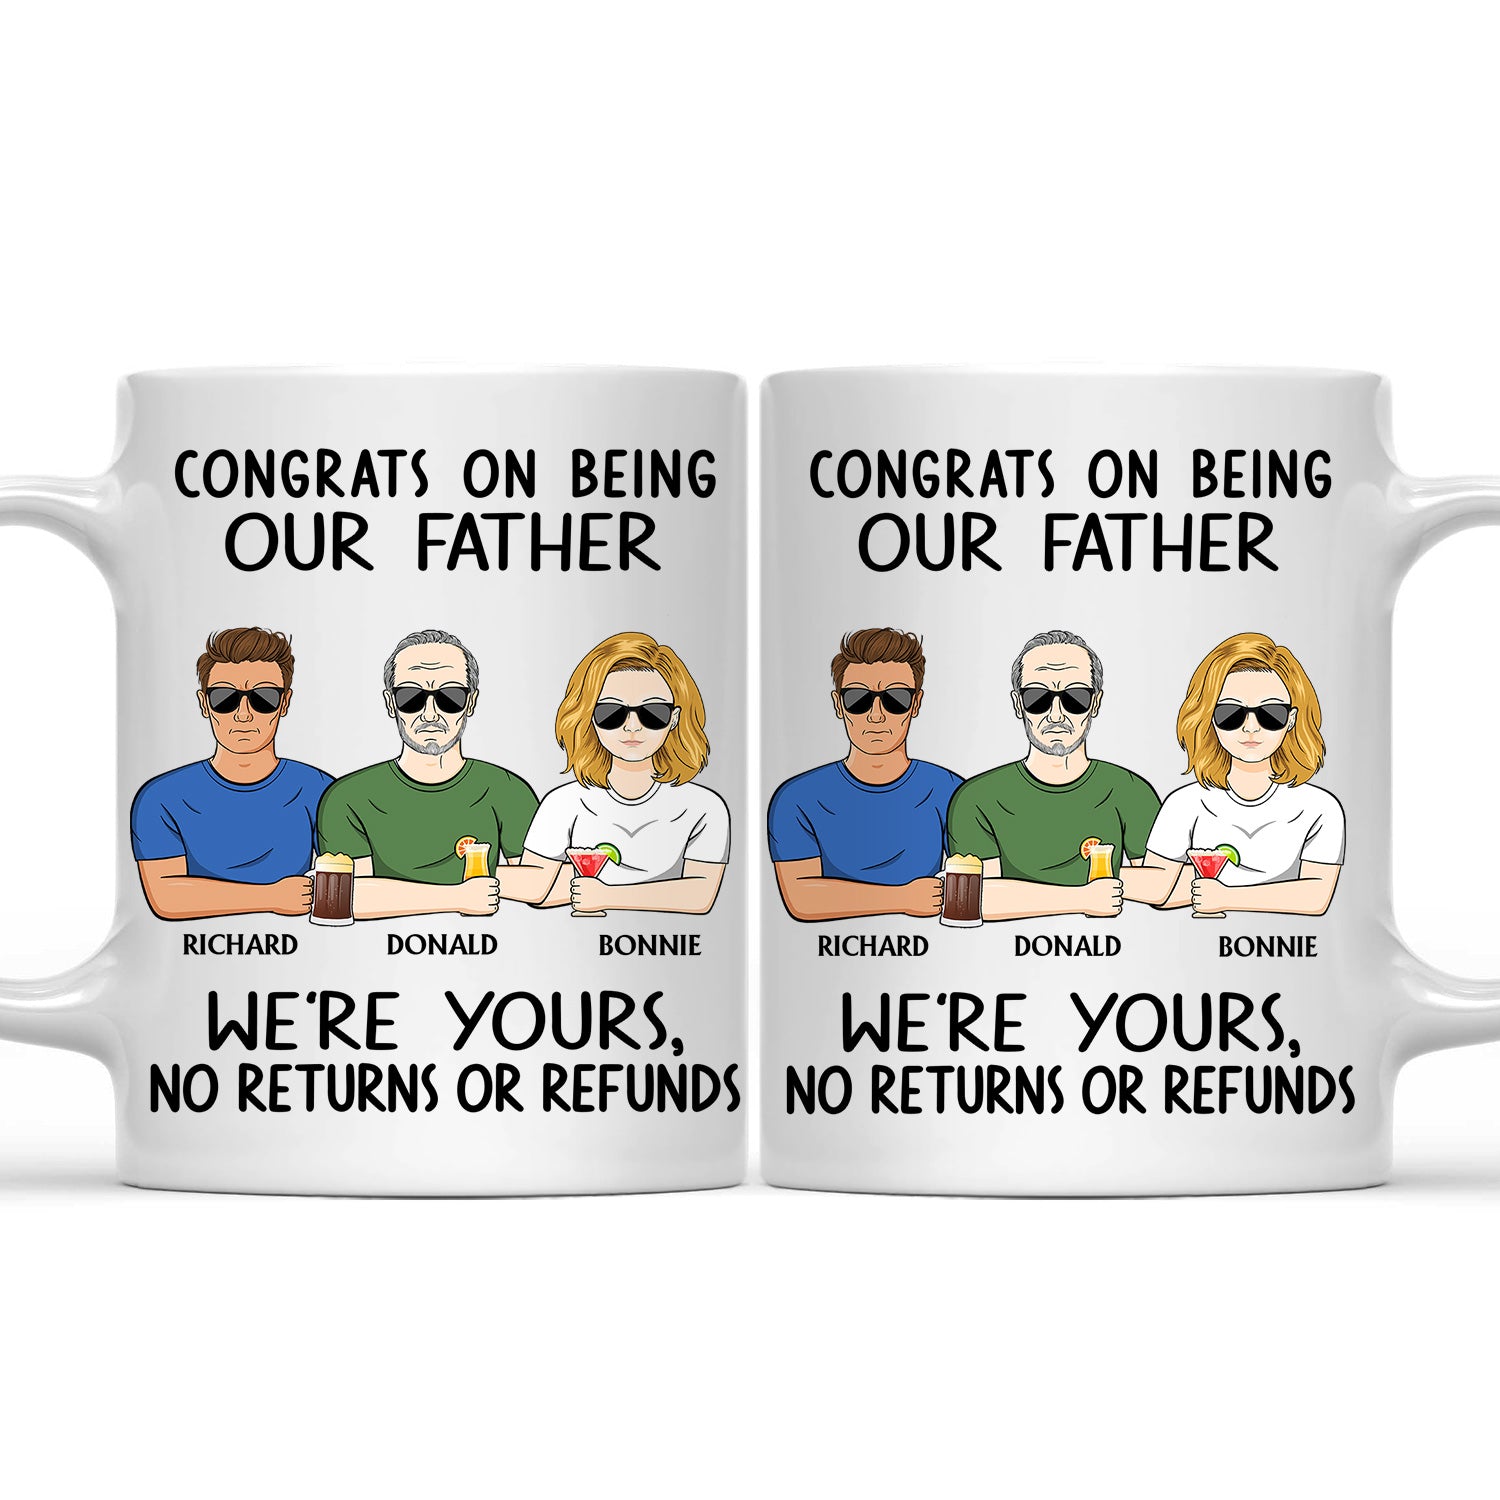 Congrats On Being Our Father - Funny Gift For Dad, Father, Grandpa - Personalized Mug